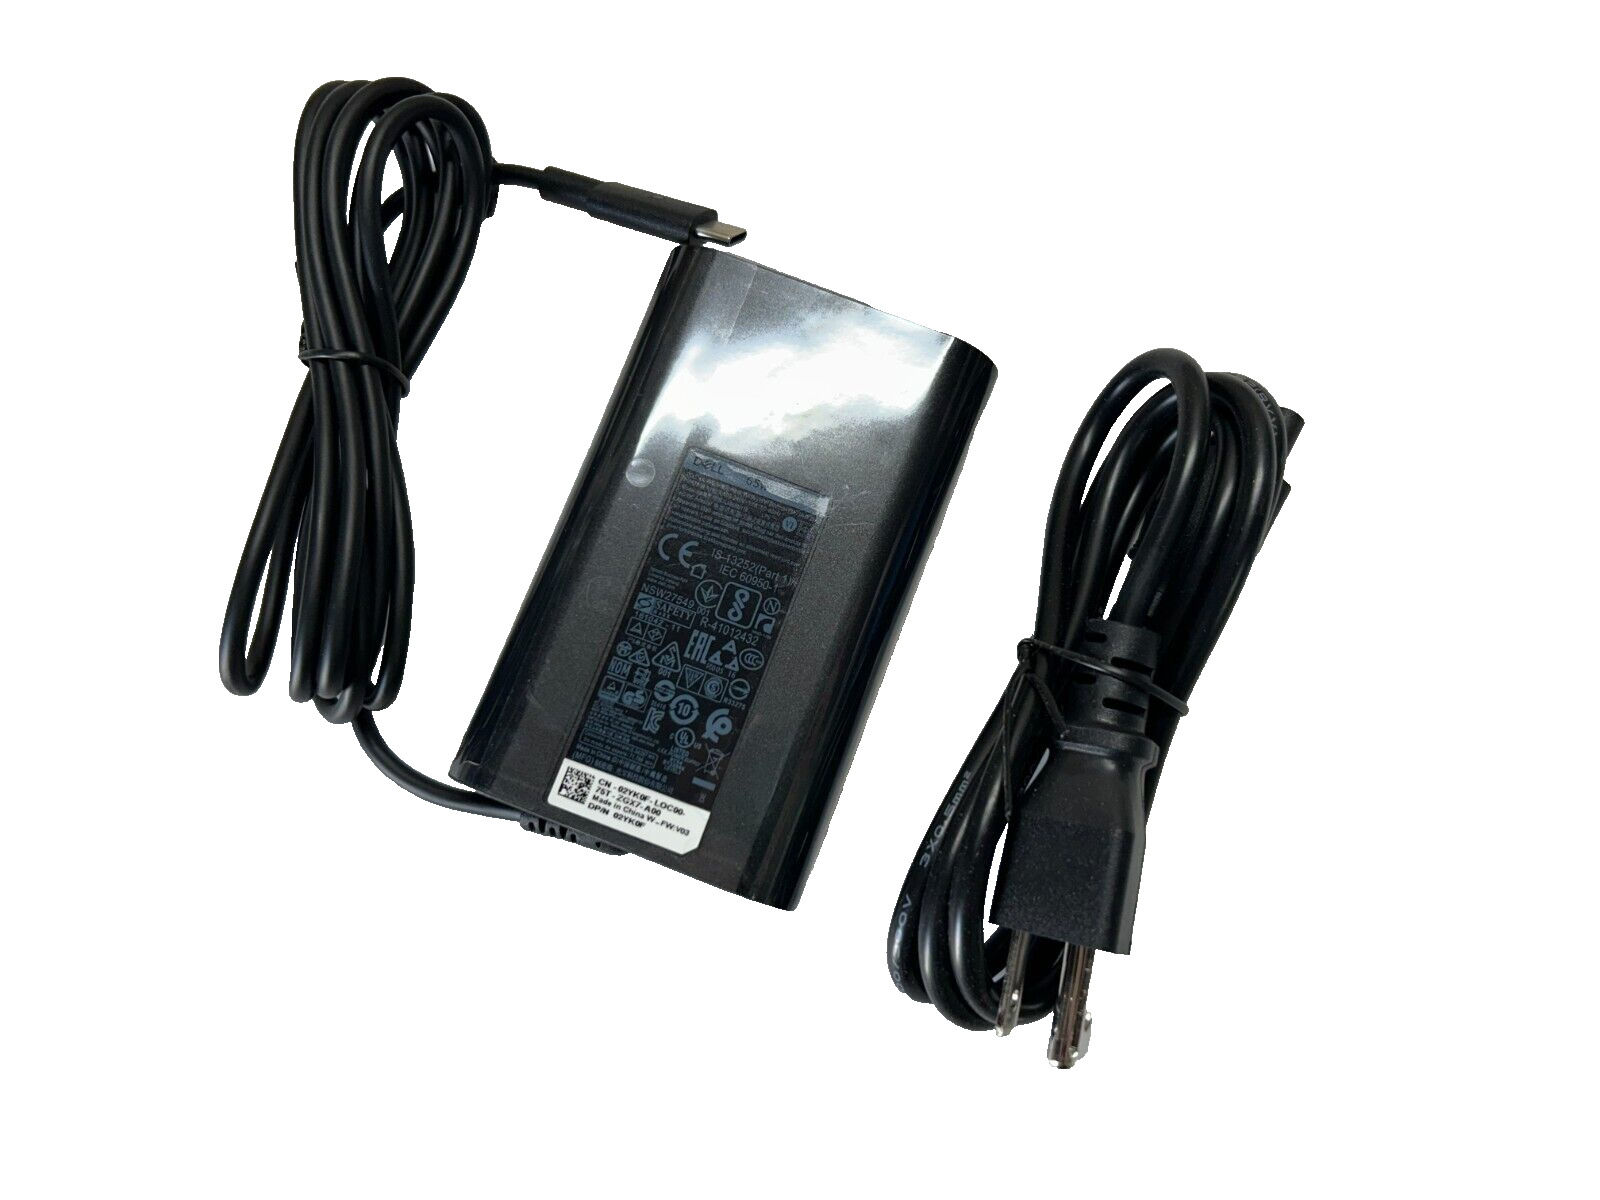 New Genuine Dell USB C AC Power Charger 65W Dell Inspiron 7000 7390 7620 w/Cord